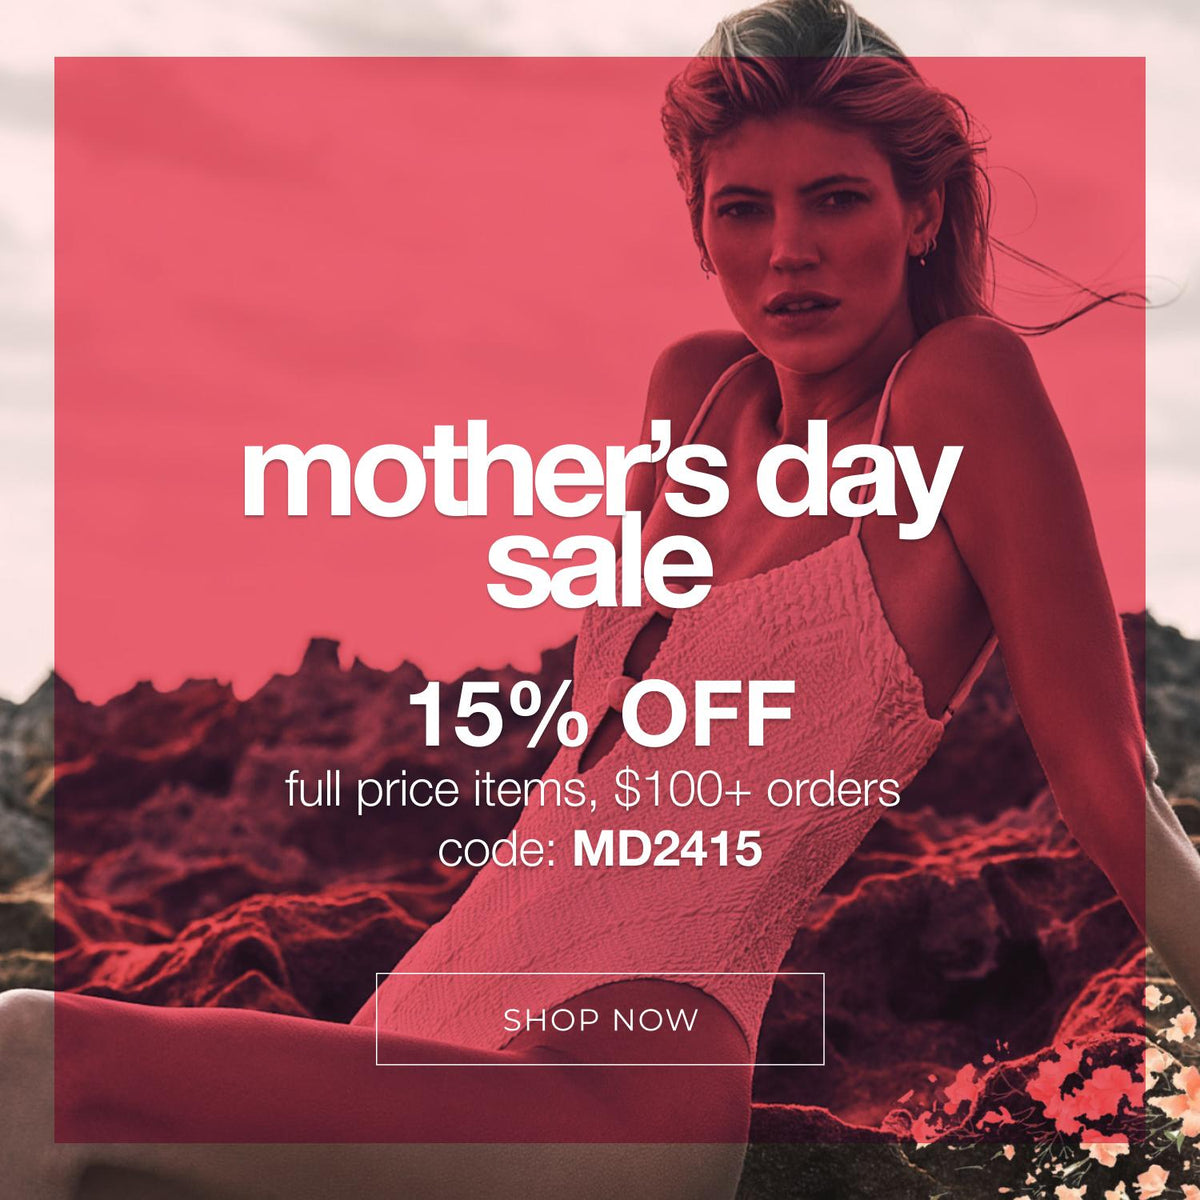 Mother's Day Sale - 15% off full price items, $100+ orders, code: MD2415